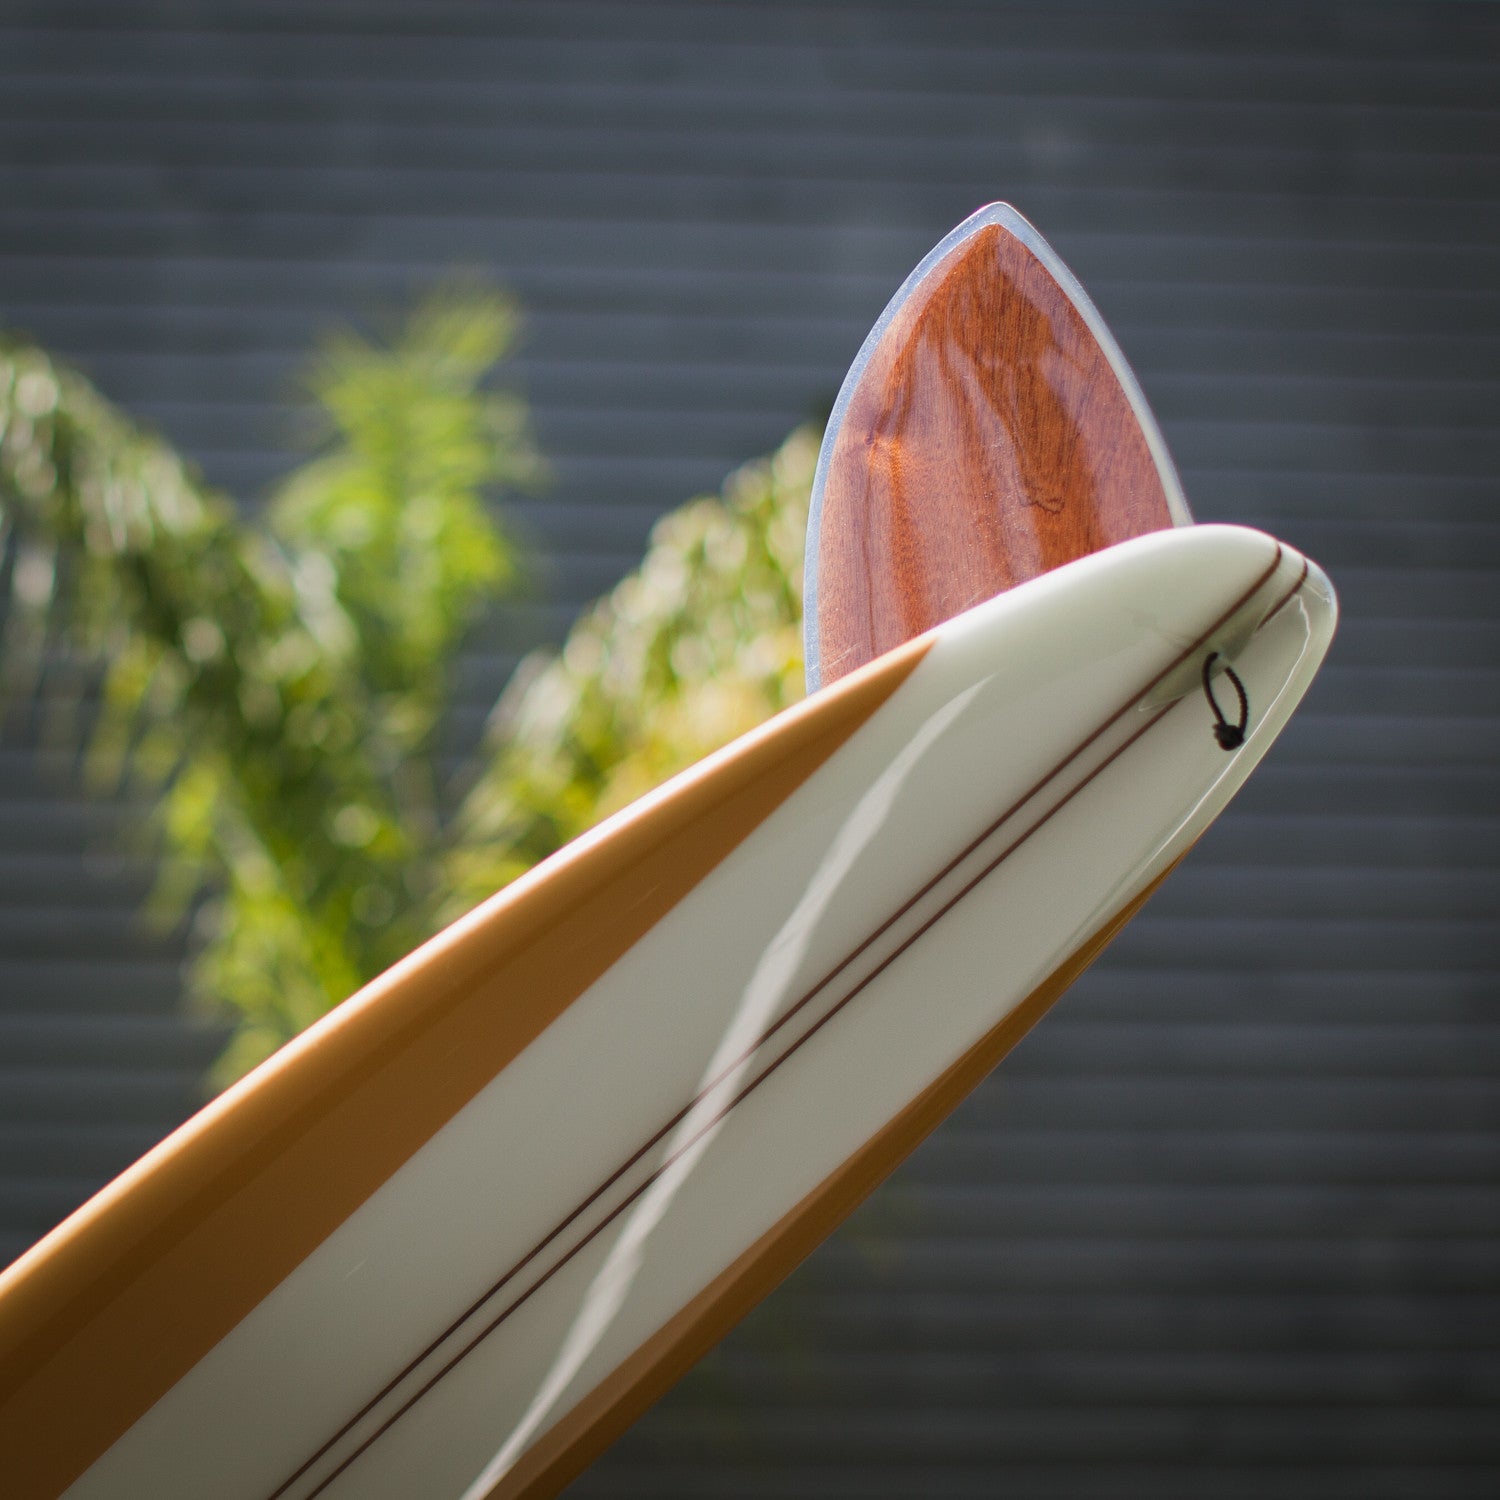 The Surf Thump | Almond Surfboards & Designs